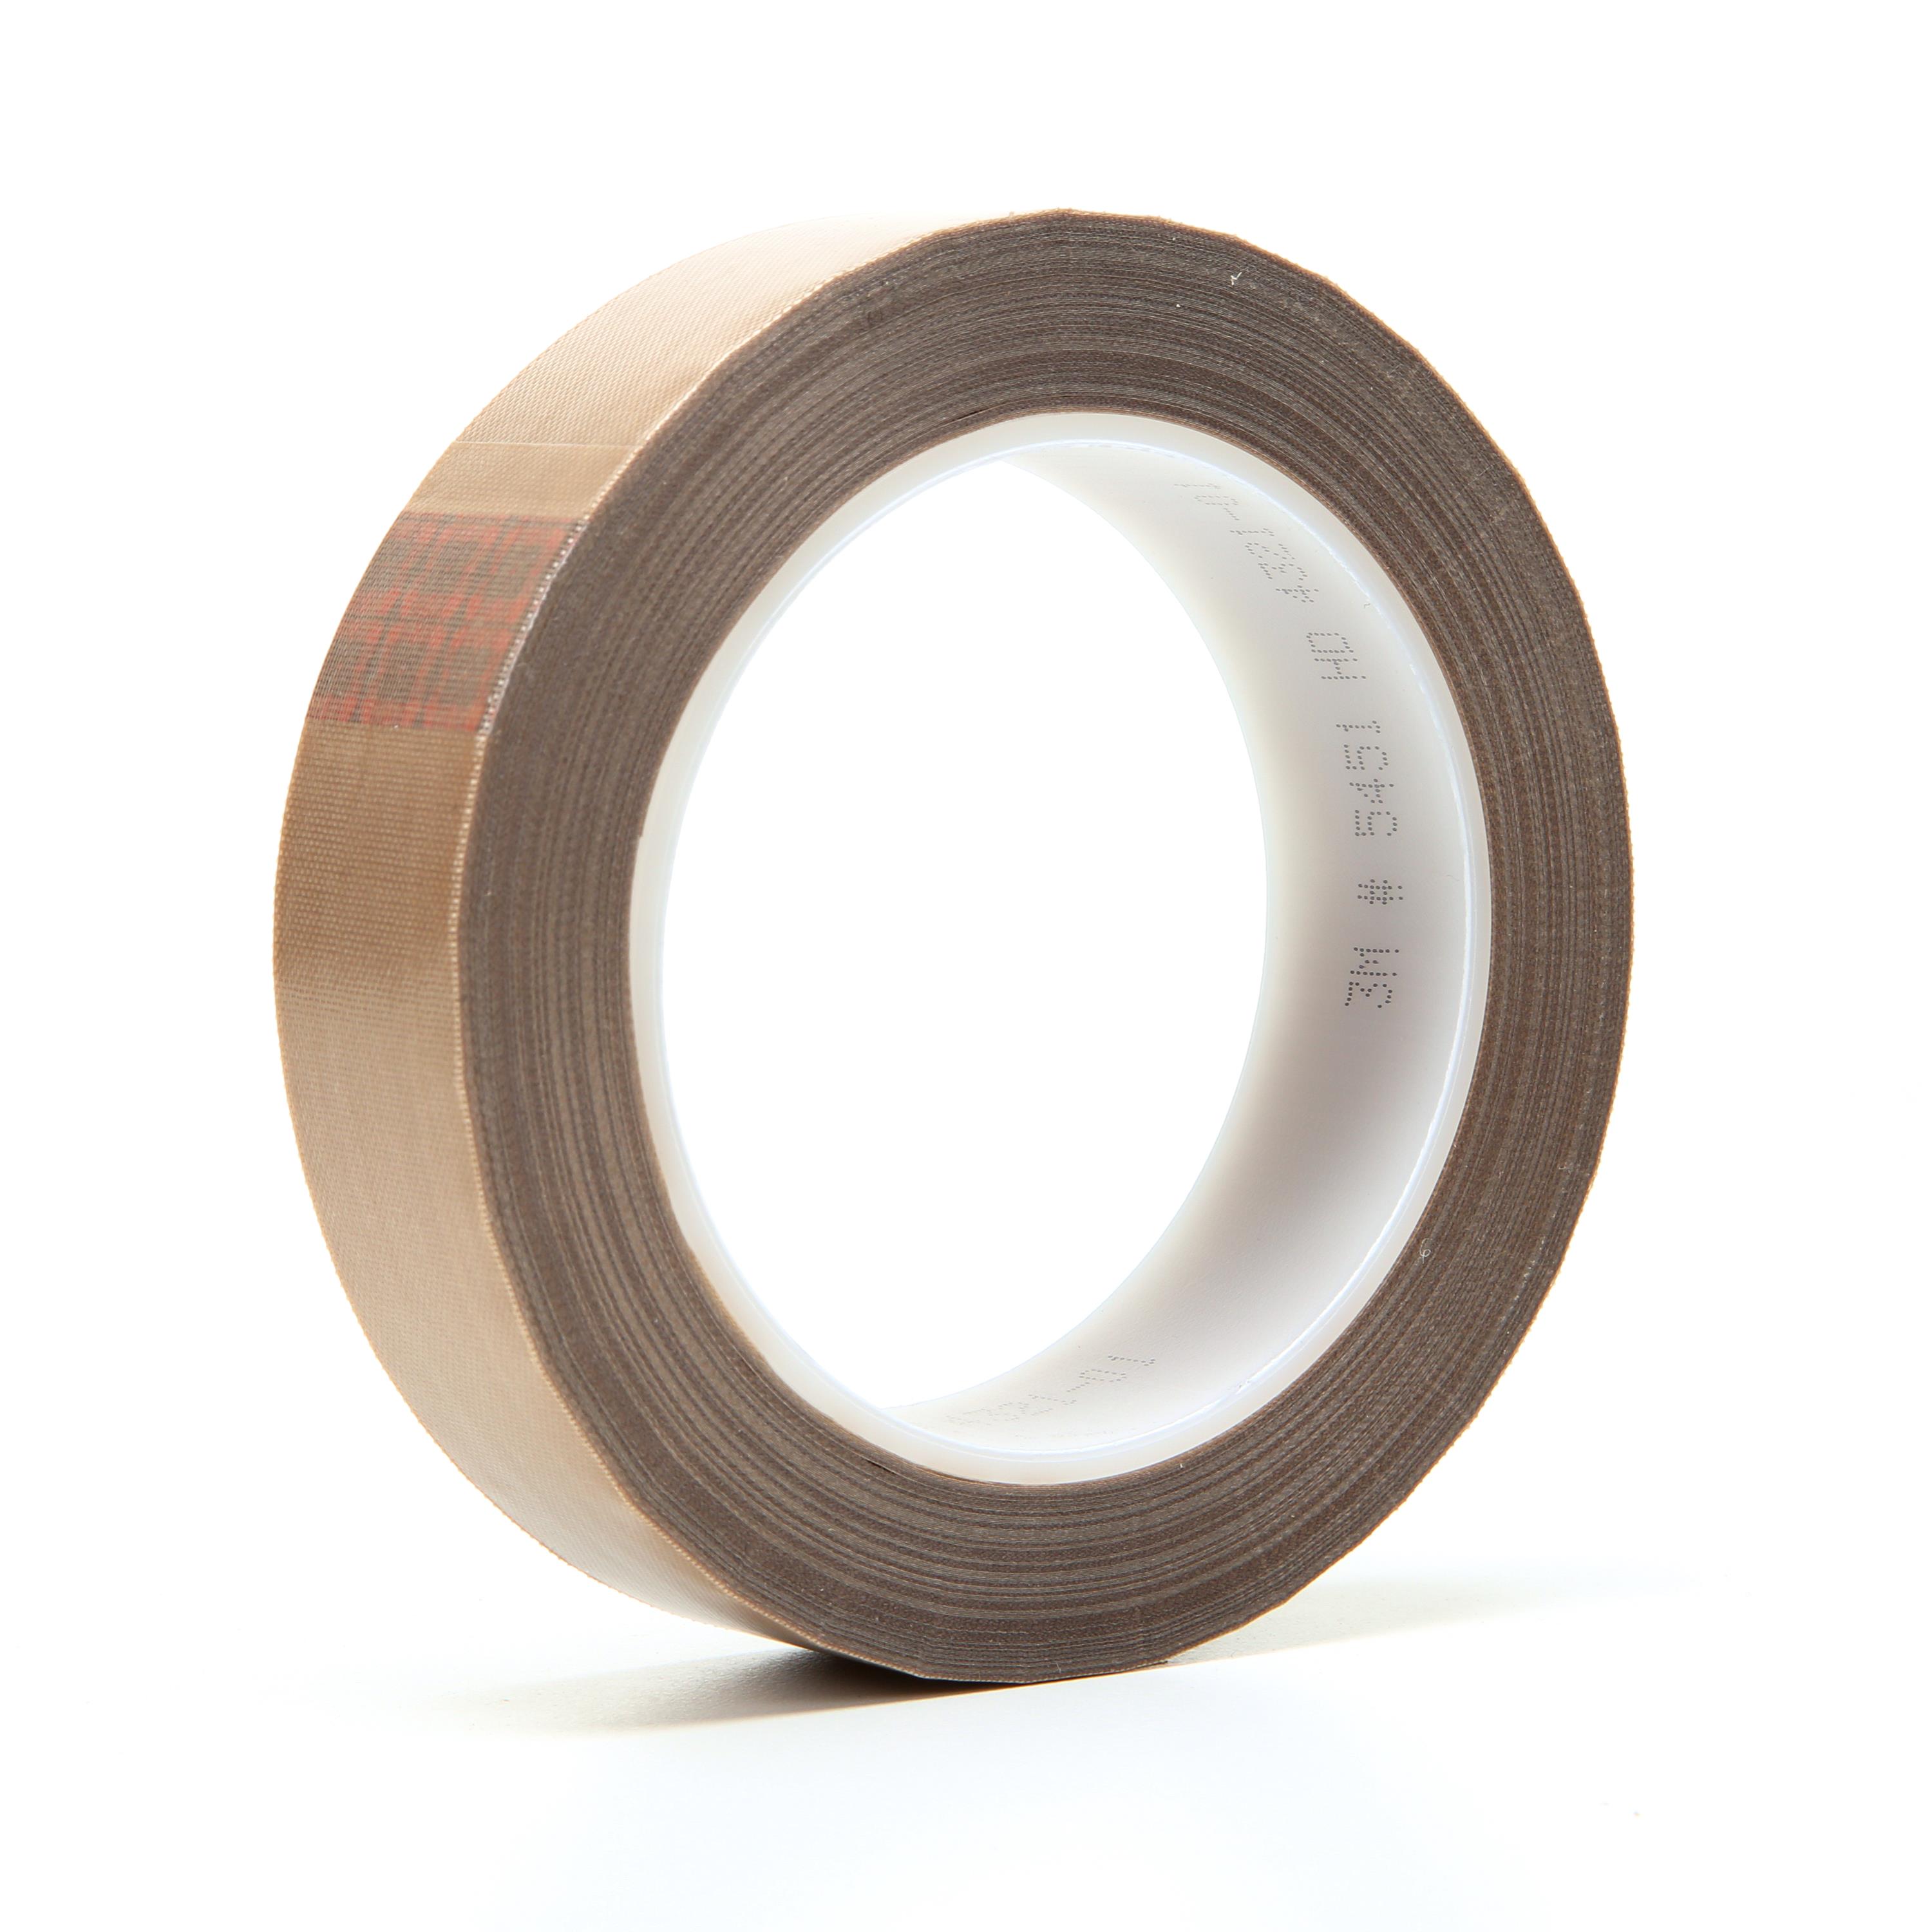 Part # 5451, 3M™ PTFE Glass Cloth Tape On Converters, Inc.